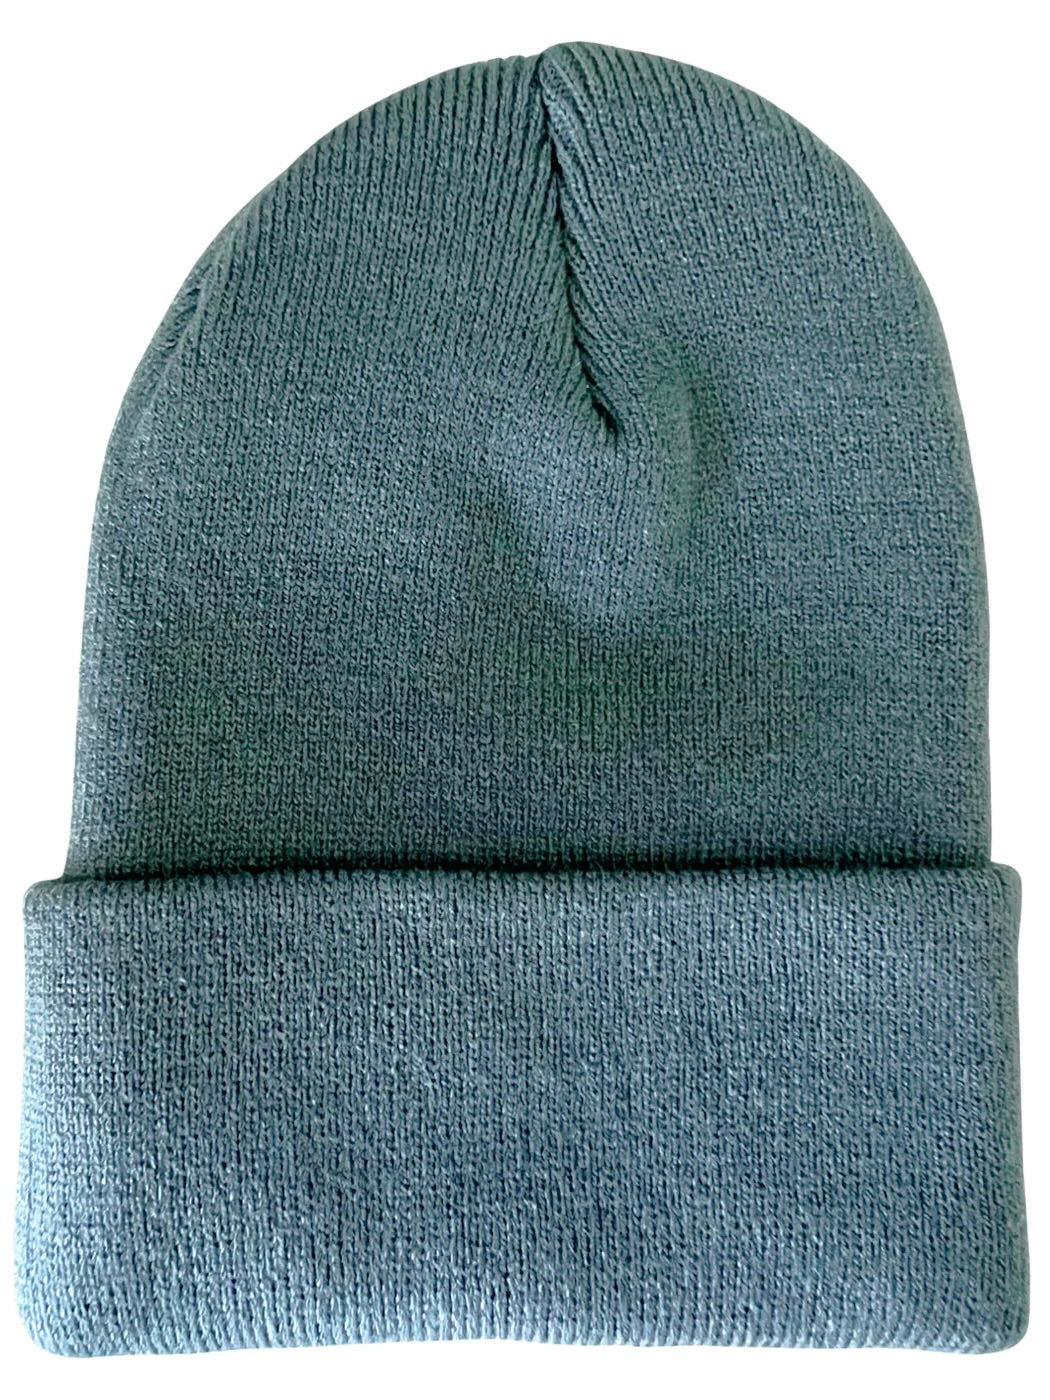 Baby's First Hat- Sky Blue